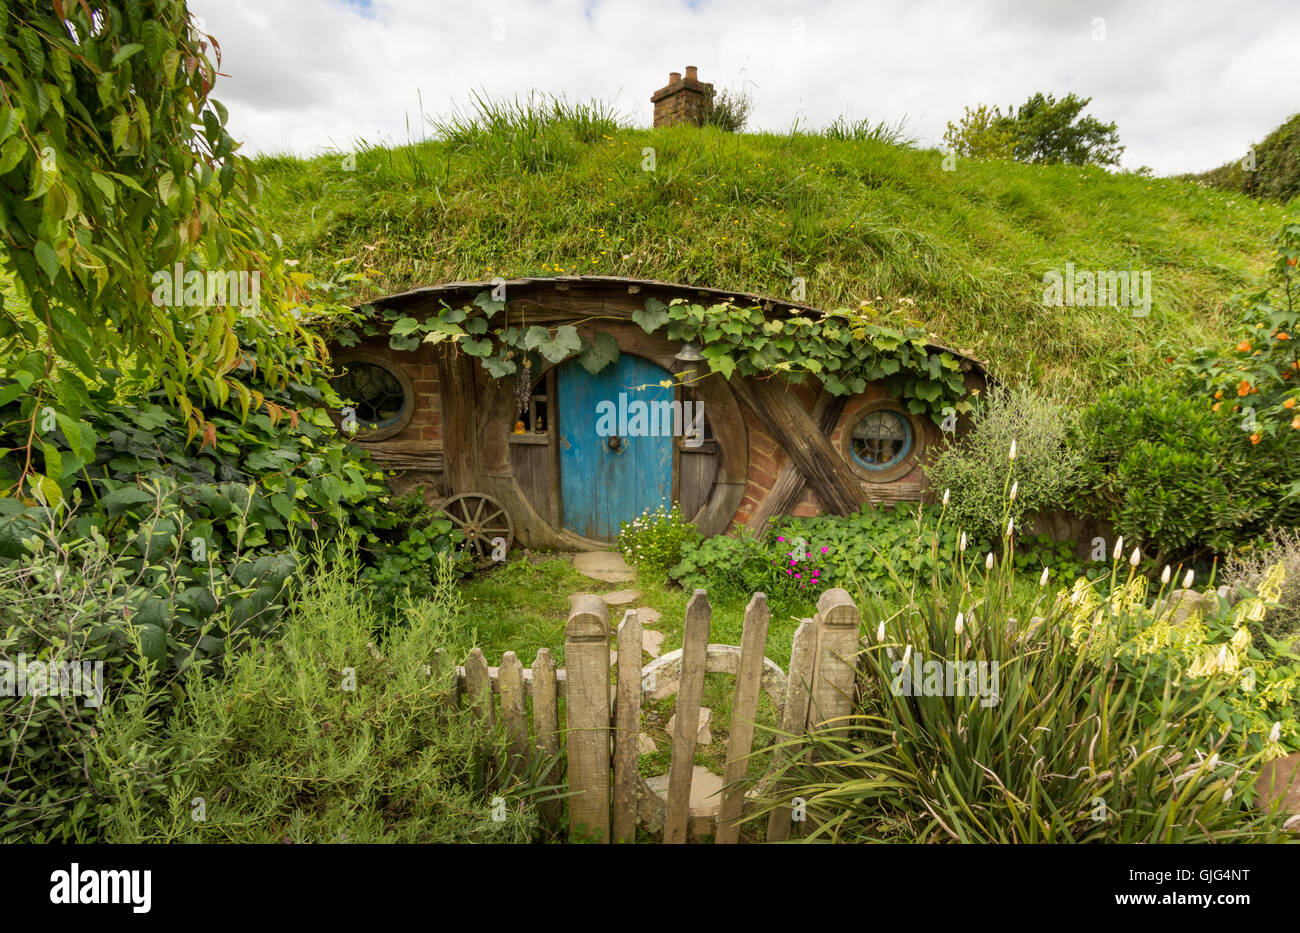 HOBBITON home of the HOBBIT movie and LORD OF THE RINGS 2016 on FEBRUARY 04, 2016 in Matamata, New Zealand 2016 Stock Photo